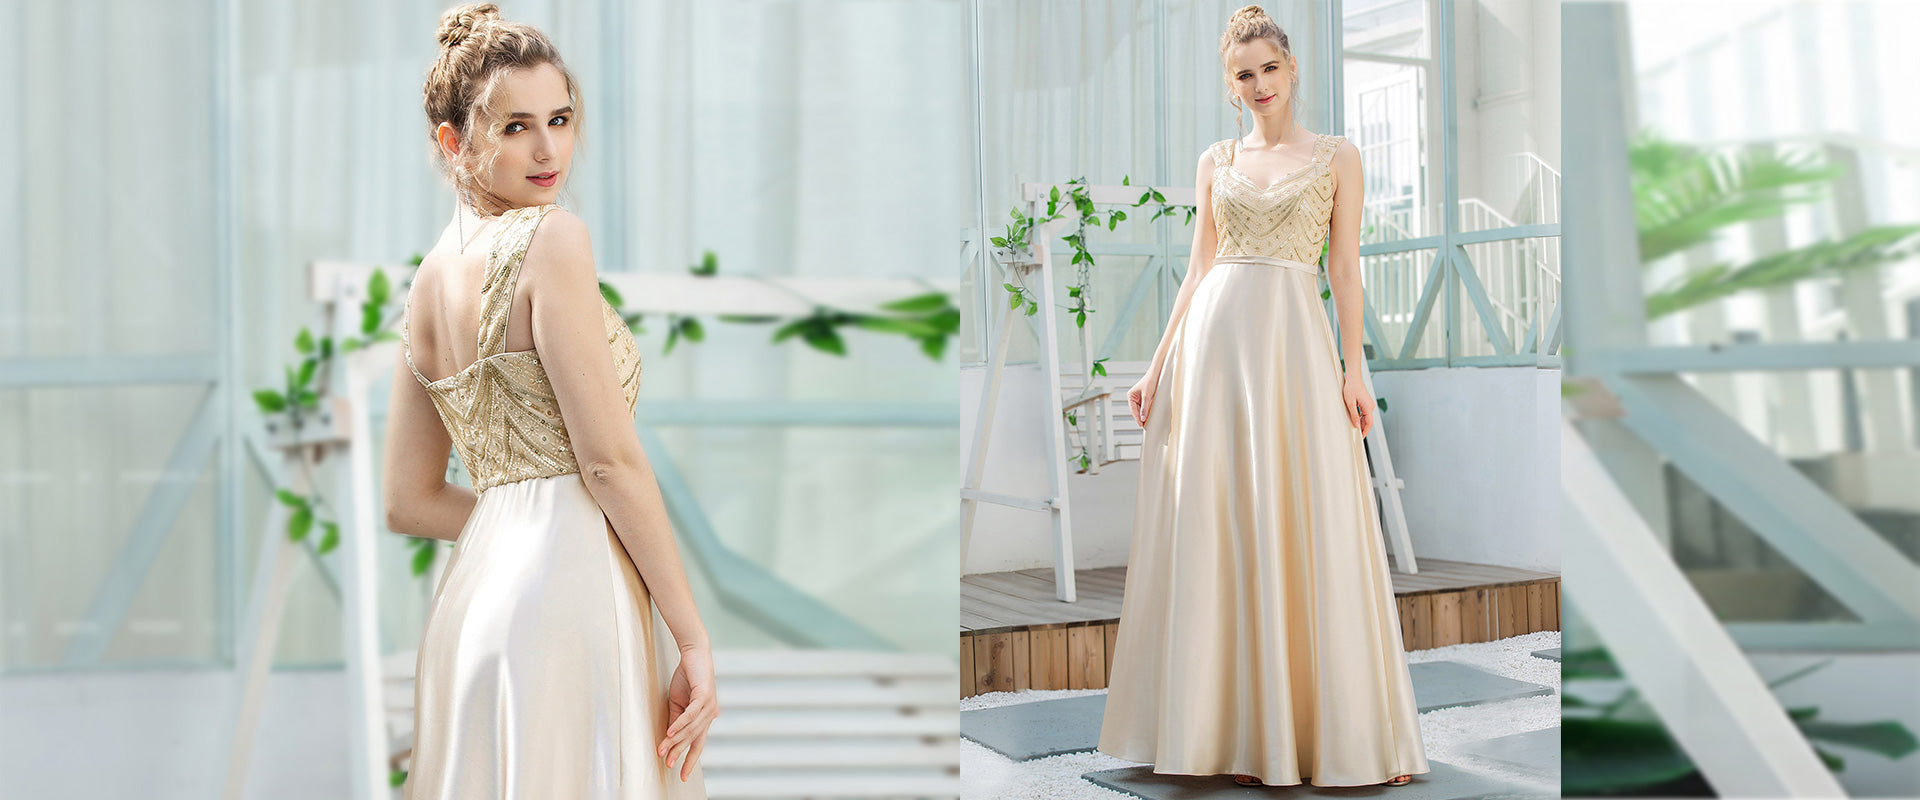 The Truth About Bridesmaid Dress That You Need To Know